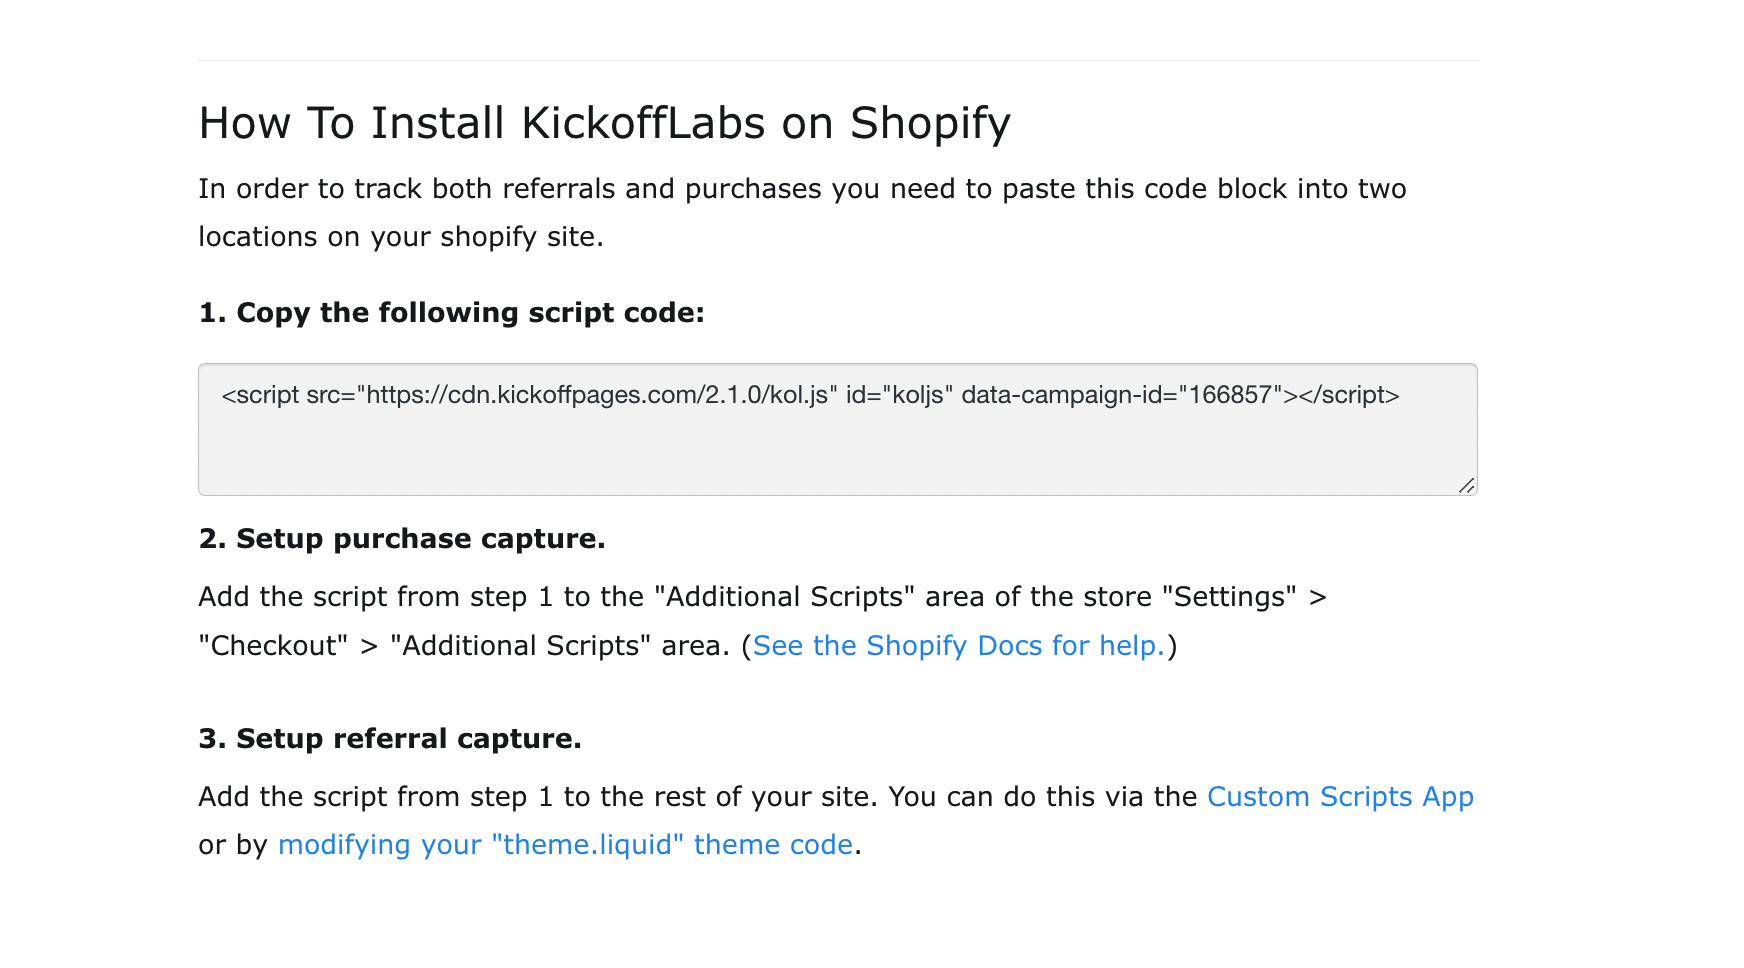 copy the script to add to shopify